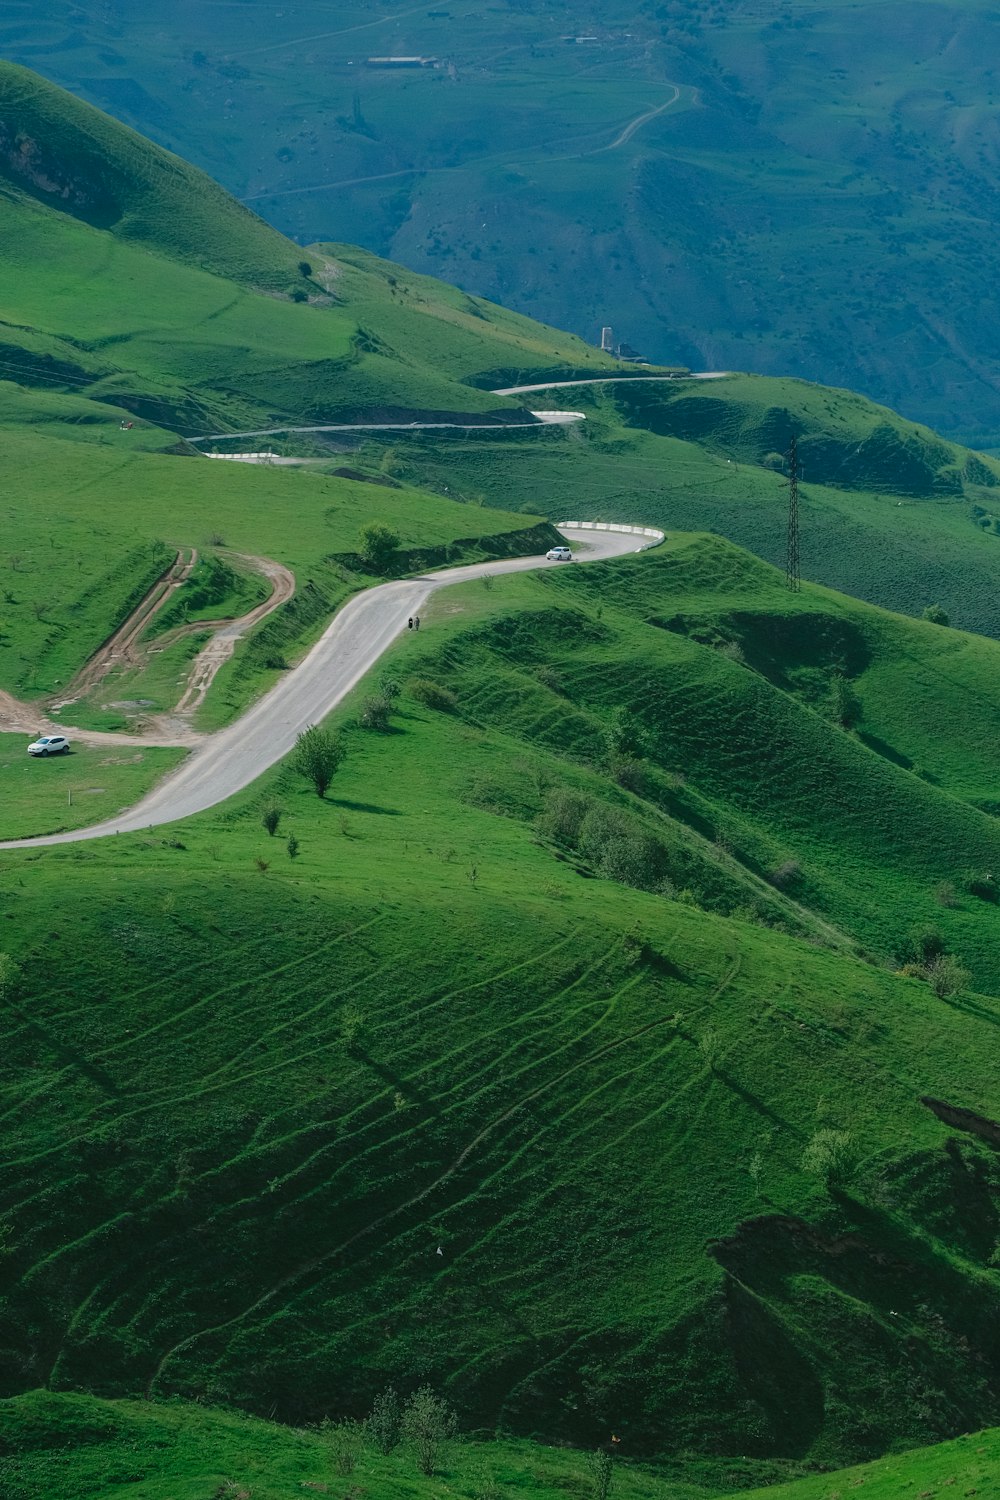 a winding road in the middle of a lush green valley